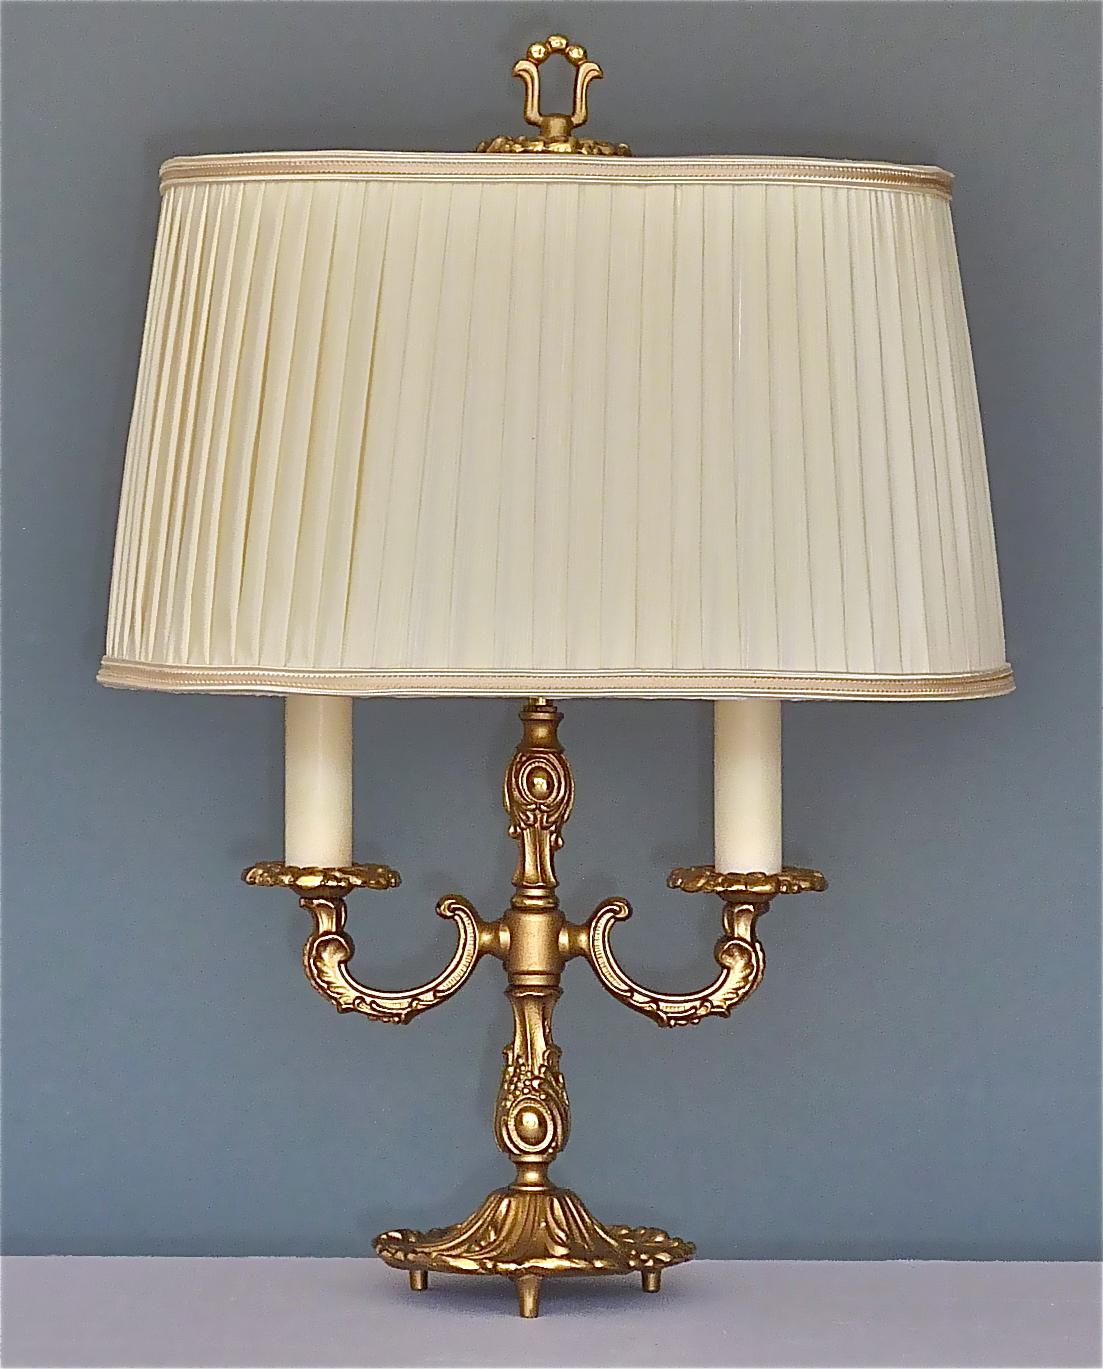 Baroque style patinated brass table lamp with floral leaf details, Germany around 1950s to 1960s. The high quality midcentury table lamp is 50 cm / 19.69 inches tall 23 cm / 9.06 inches wide and has a width of 12 cm / 4.72 inches at the base. It has